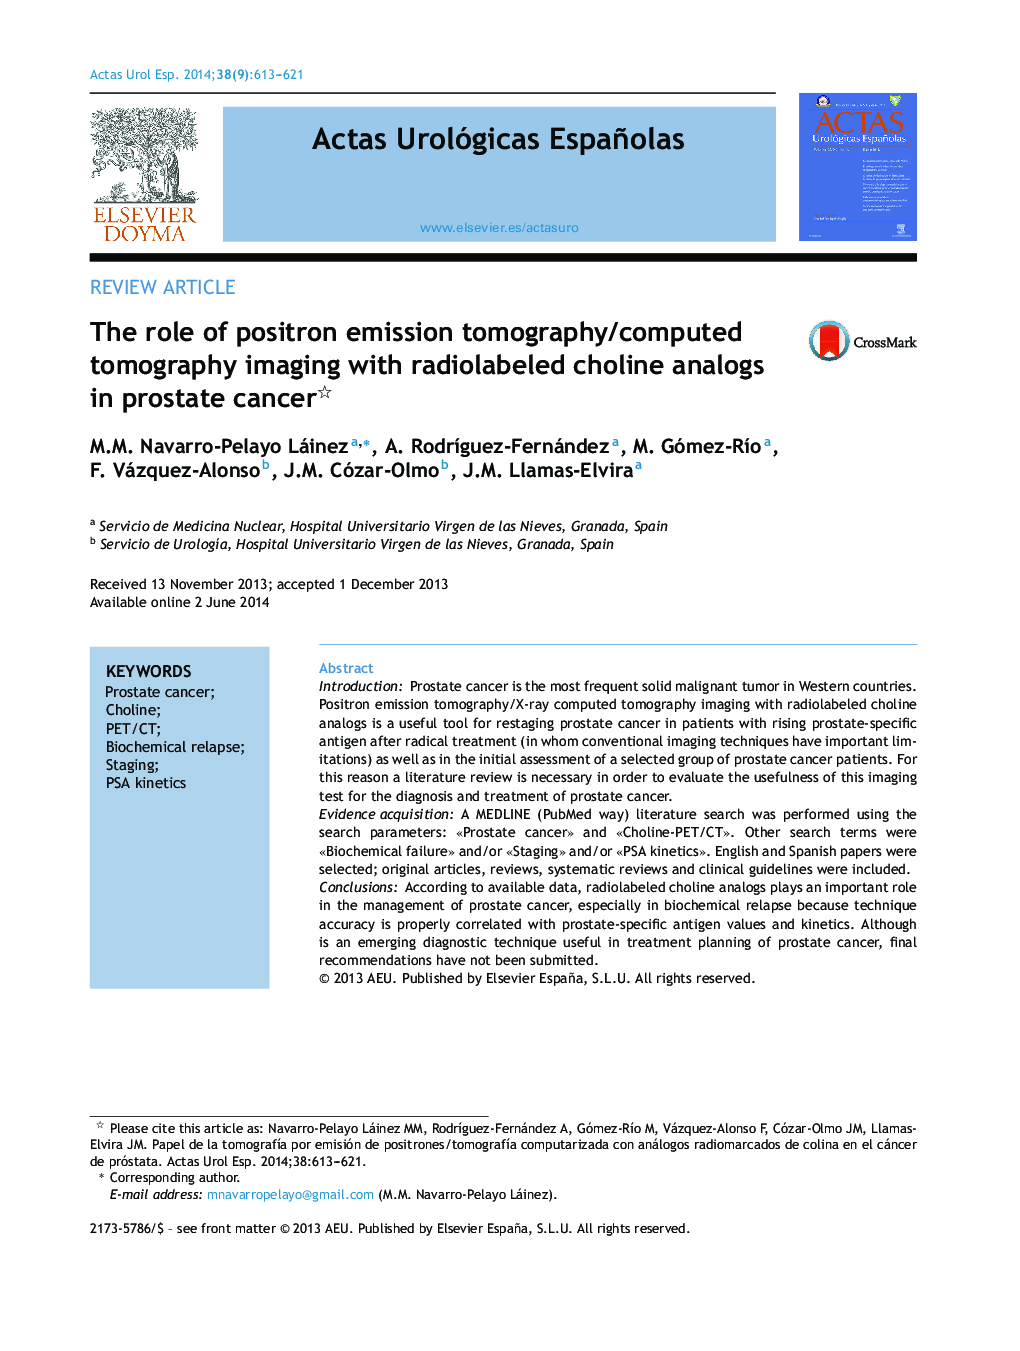 The role of positron emission tomography/computed tomography imaging with radiolabeled choline analogs in prostate cancer